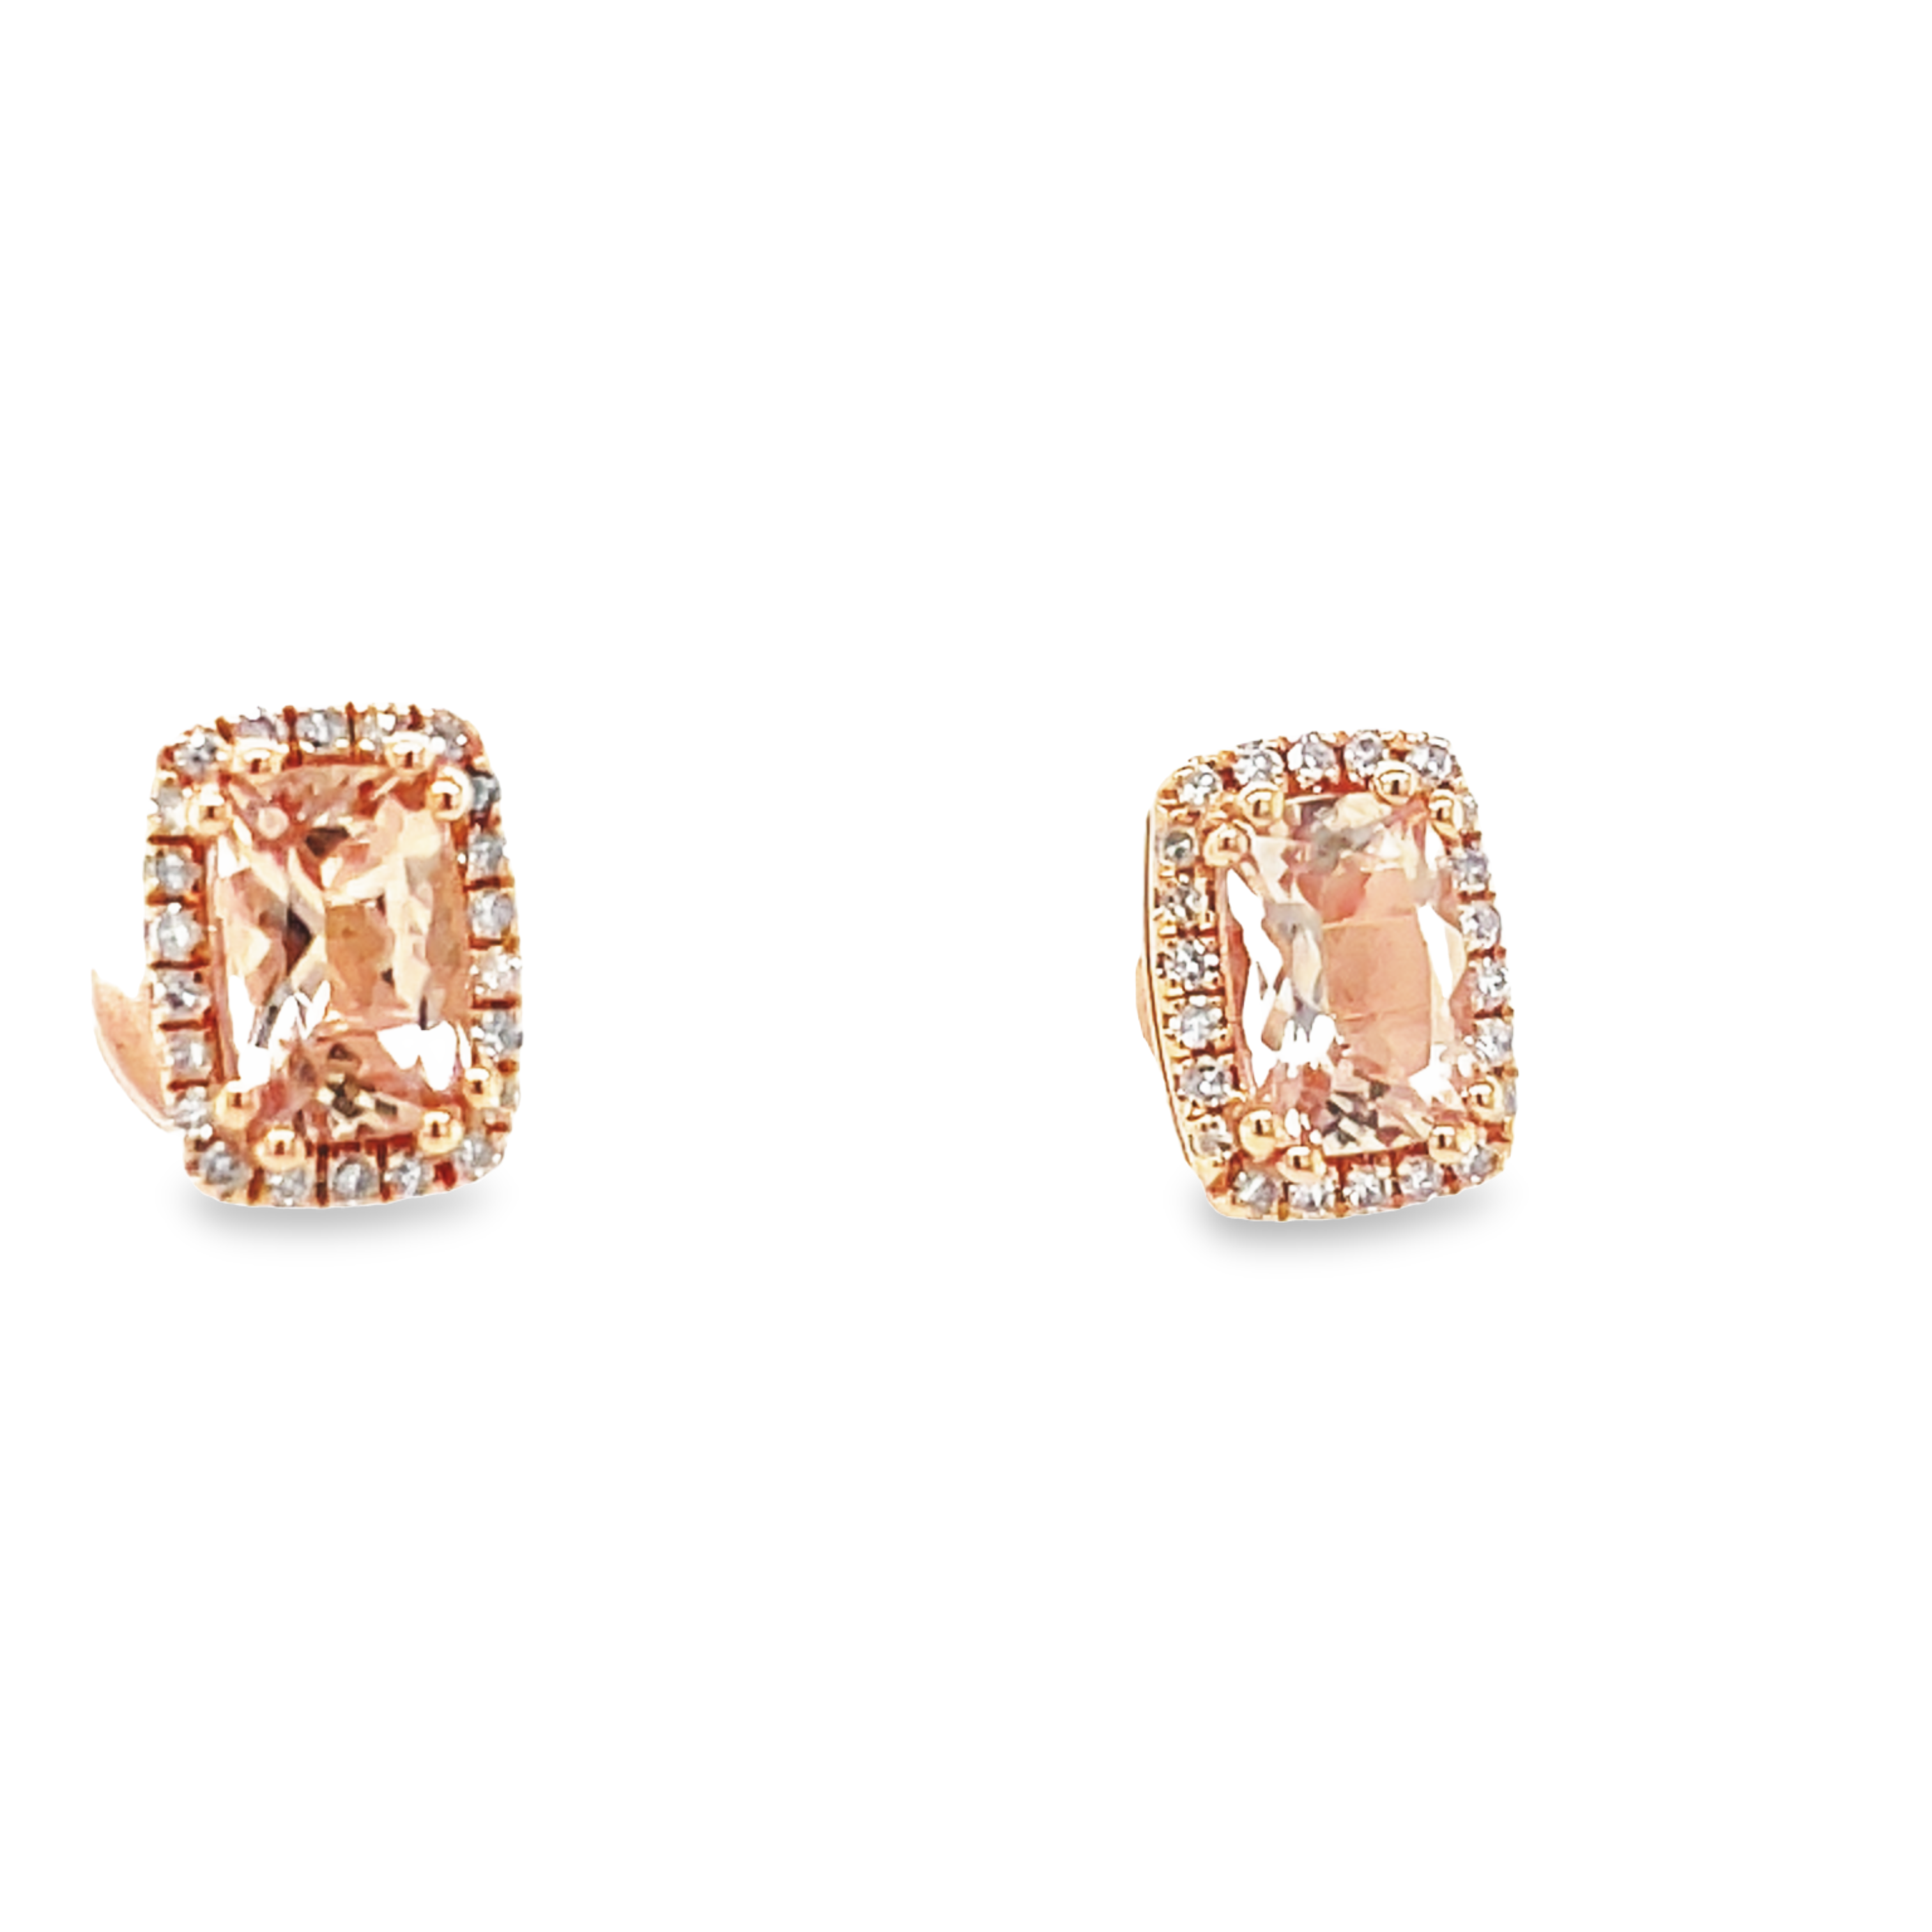 Round morganite 1.05 cts  Round diamonds 0.15 cts  14k rose gold  Secure friction backs  8.50 x 6.50 mm.